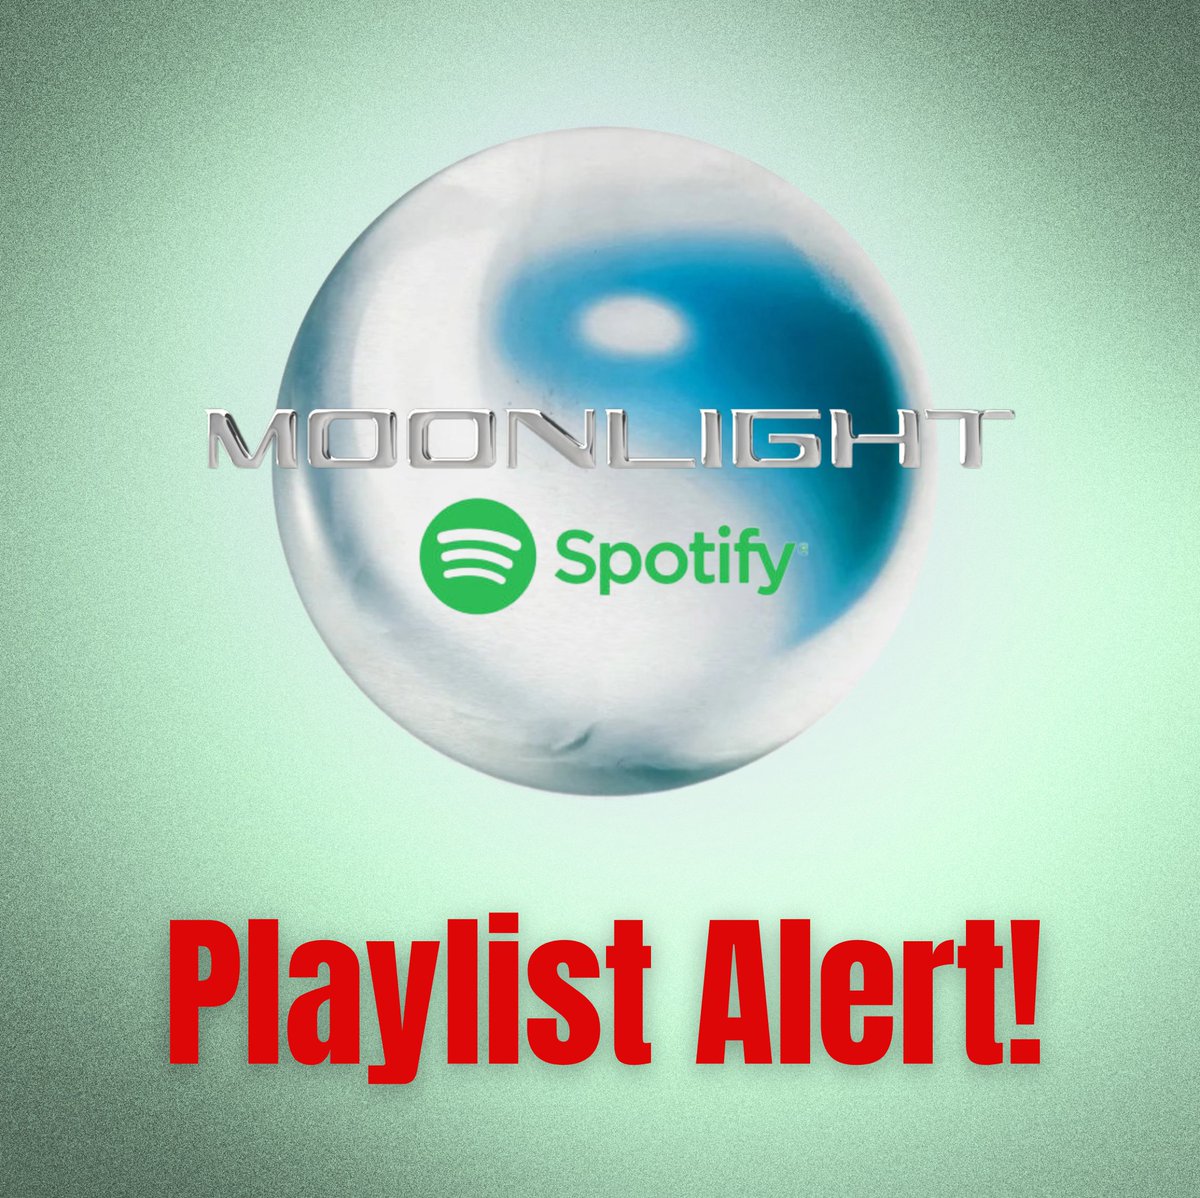 Hi, A'TIN!

Here's a thread of Spotify Algorithmic/Editorial Playlists for SB19's #NewMusic #MOONLIGHT.

SB19 MOONLIGHT OUT NOW
@SB19Official
#SB19 #IanxSB19xTerry